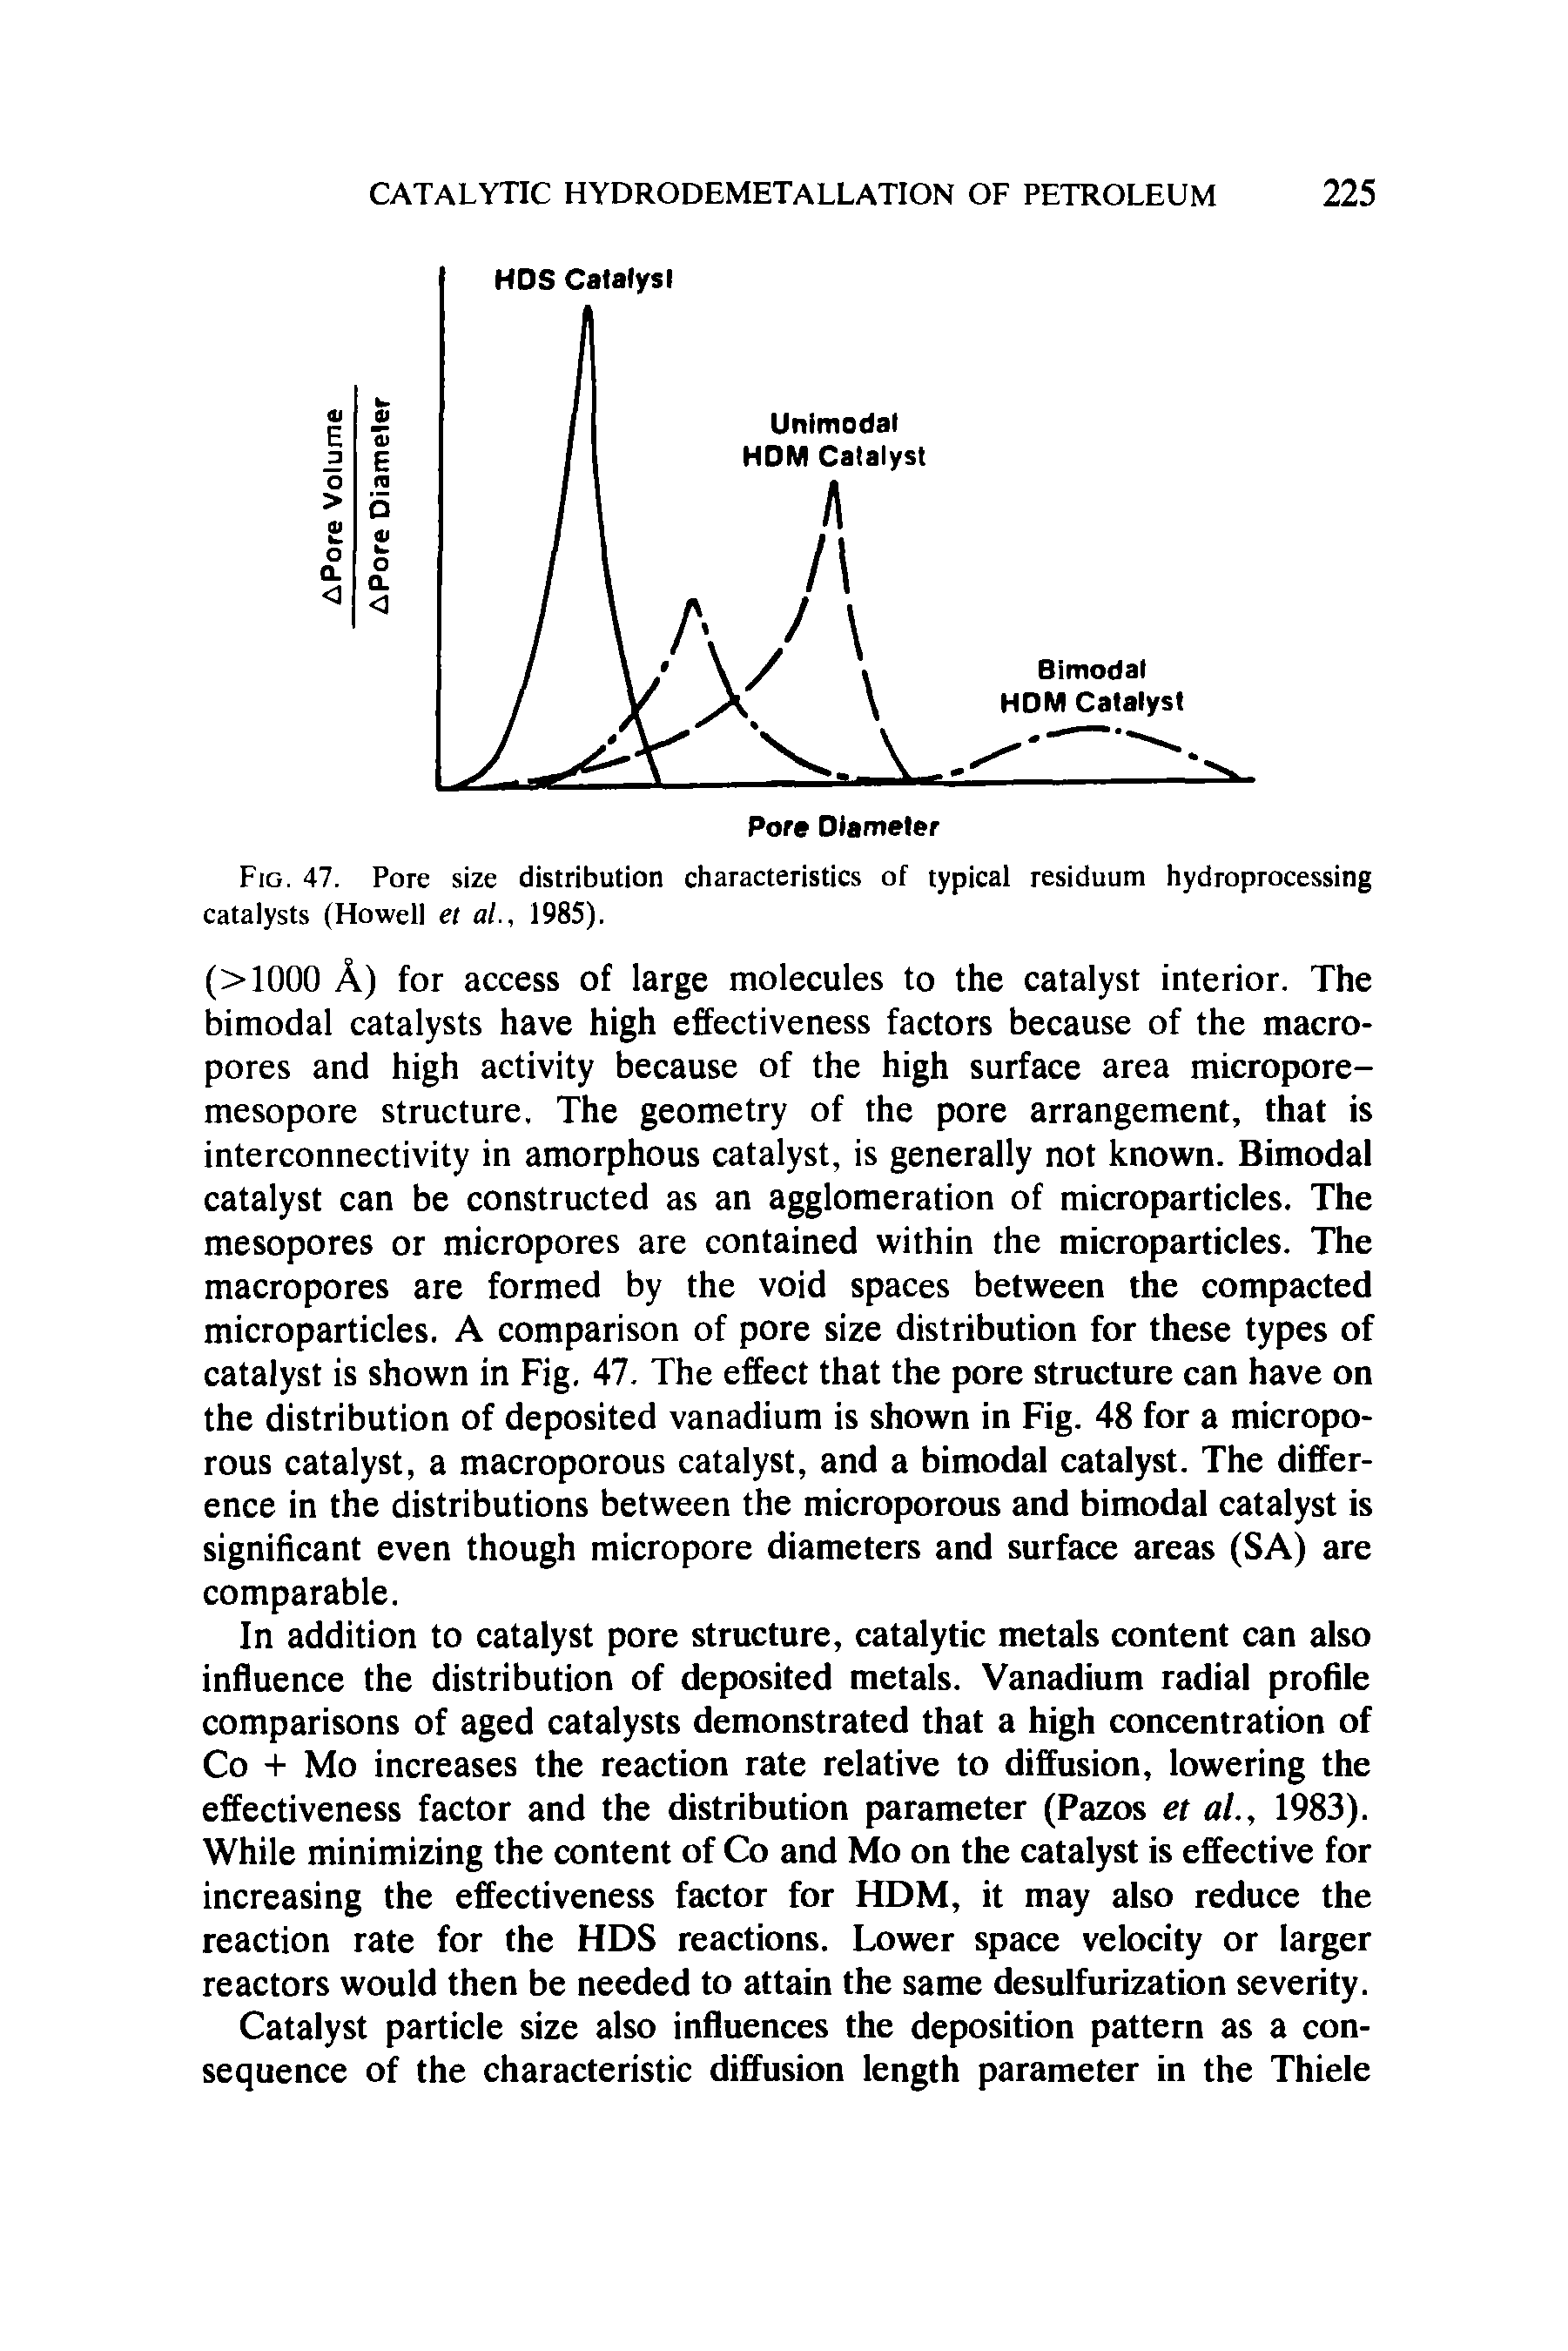 Fig. 47. Pore size distribution characteristics of typical residuum hydroprocessing catalysts (Howell et ai. 1985).